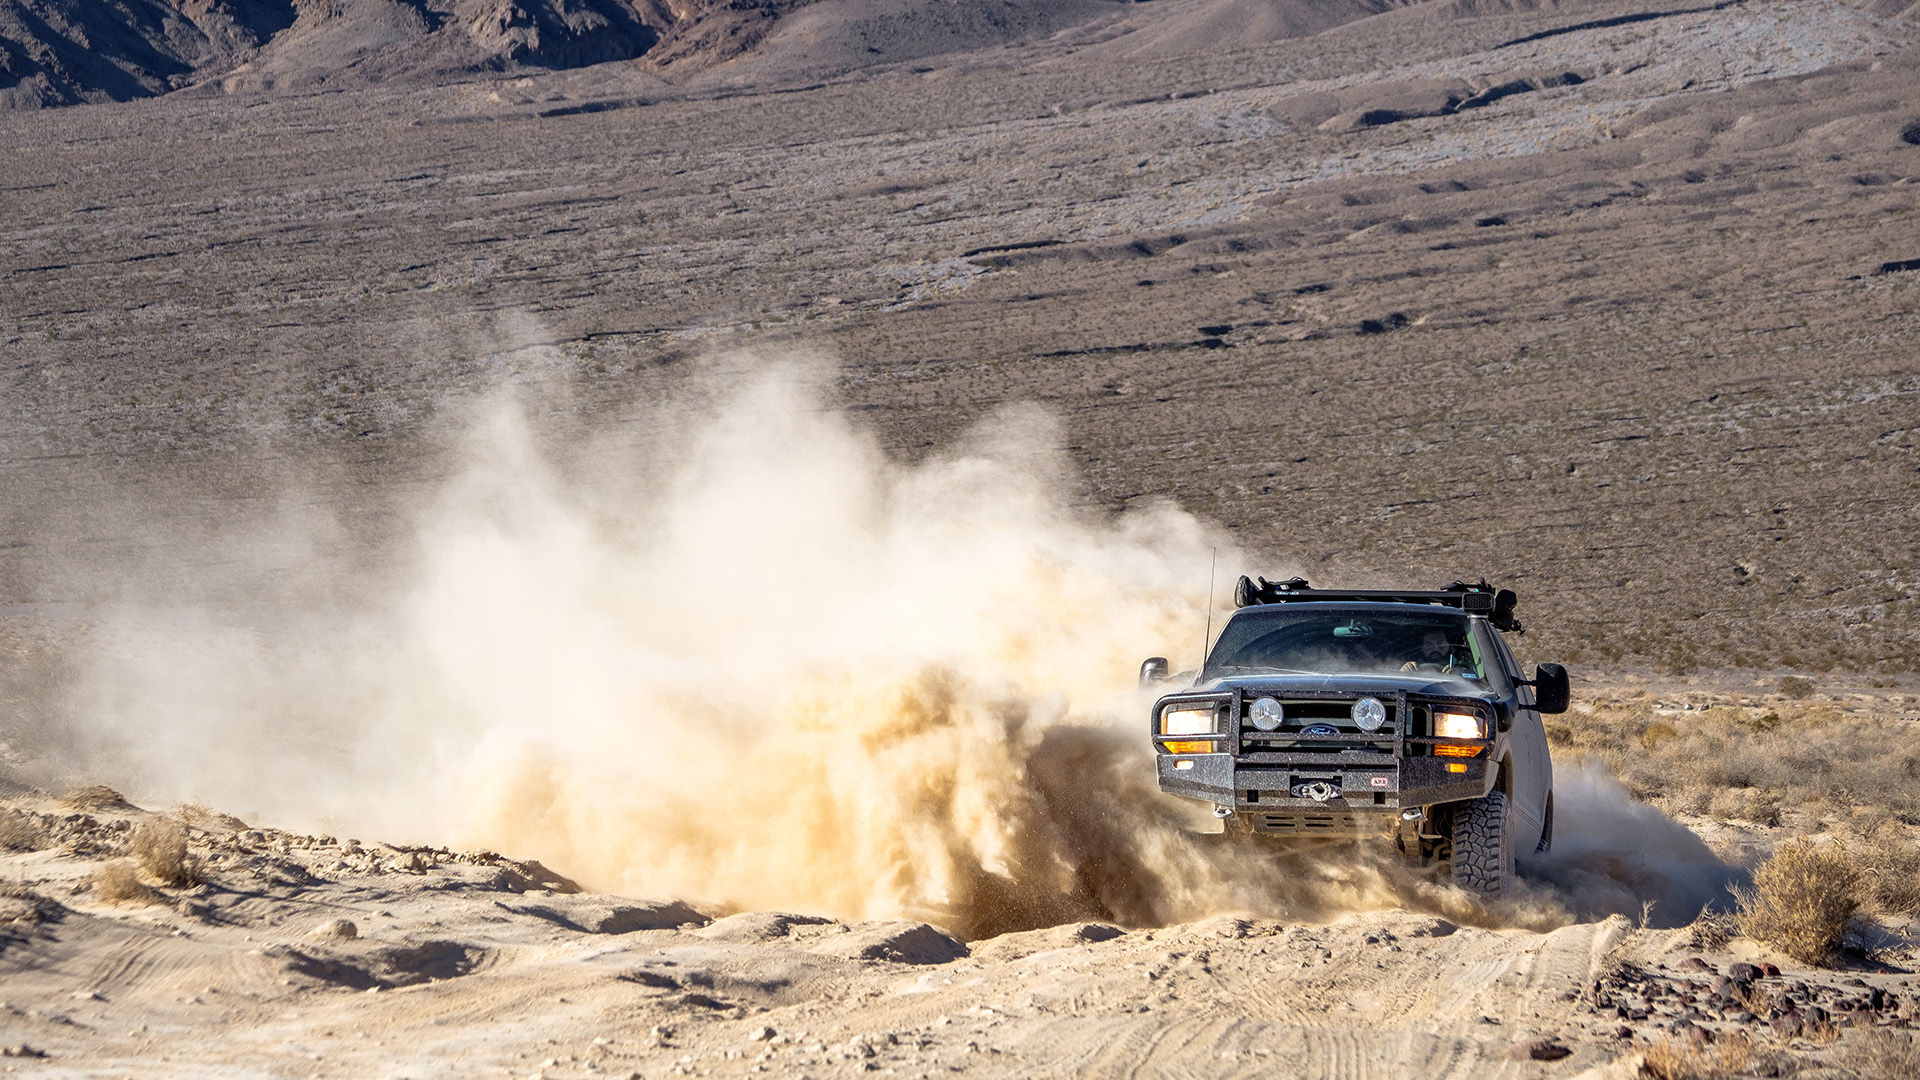 black Ford kicking up dust driving in the desert